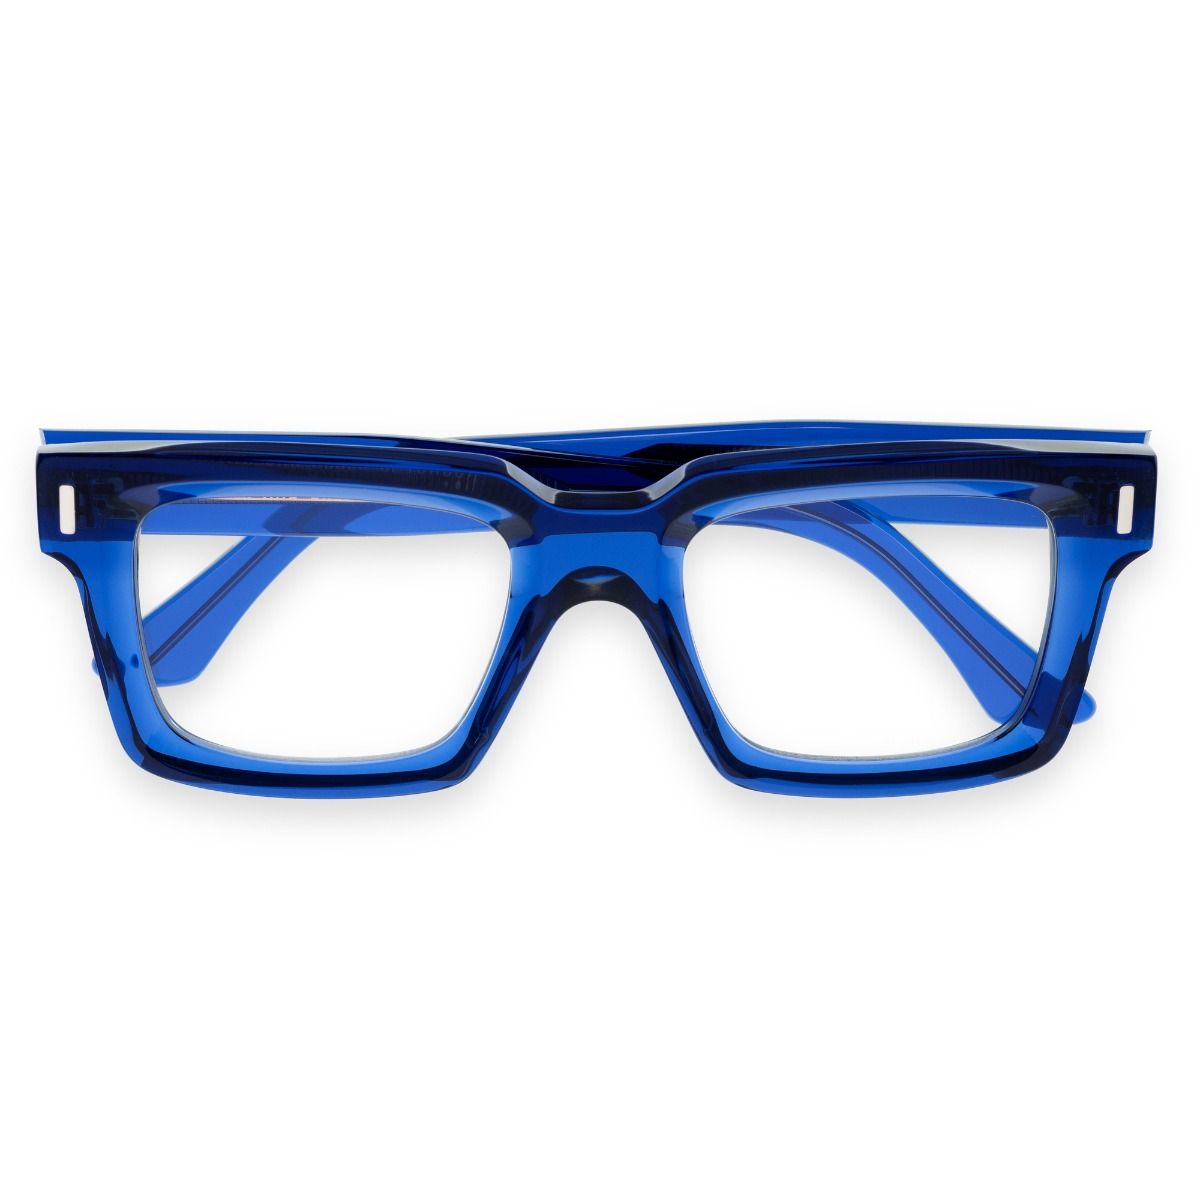 Cutler and Gross, 1386 Optical Square Glasses - Russian Blue